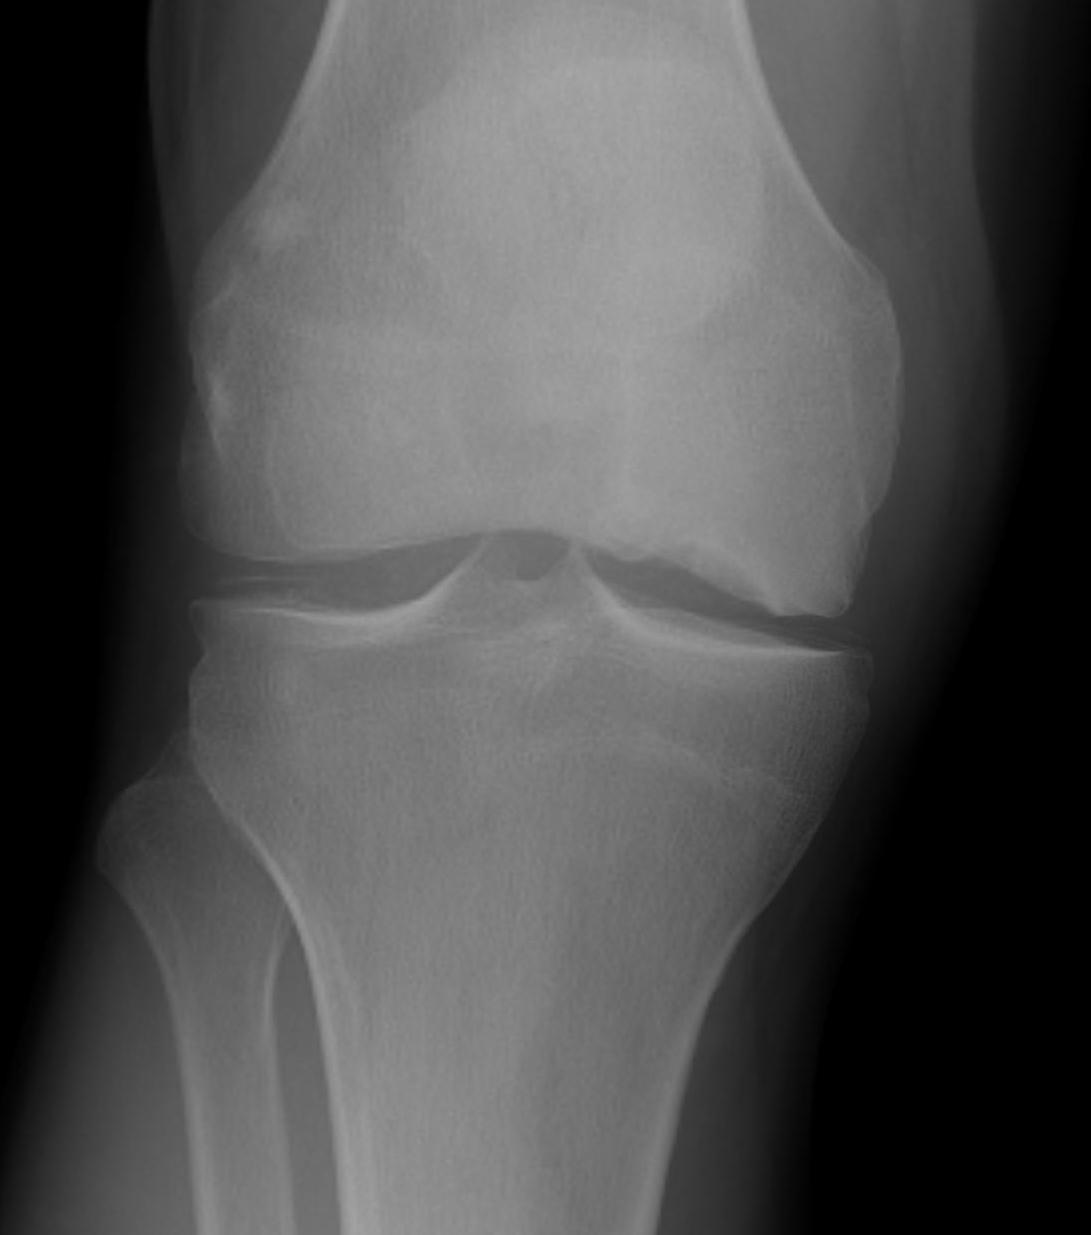 Spontaneous Osteonecrosis of the Knee